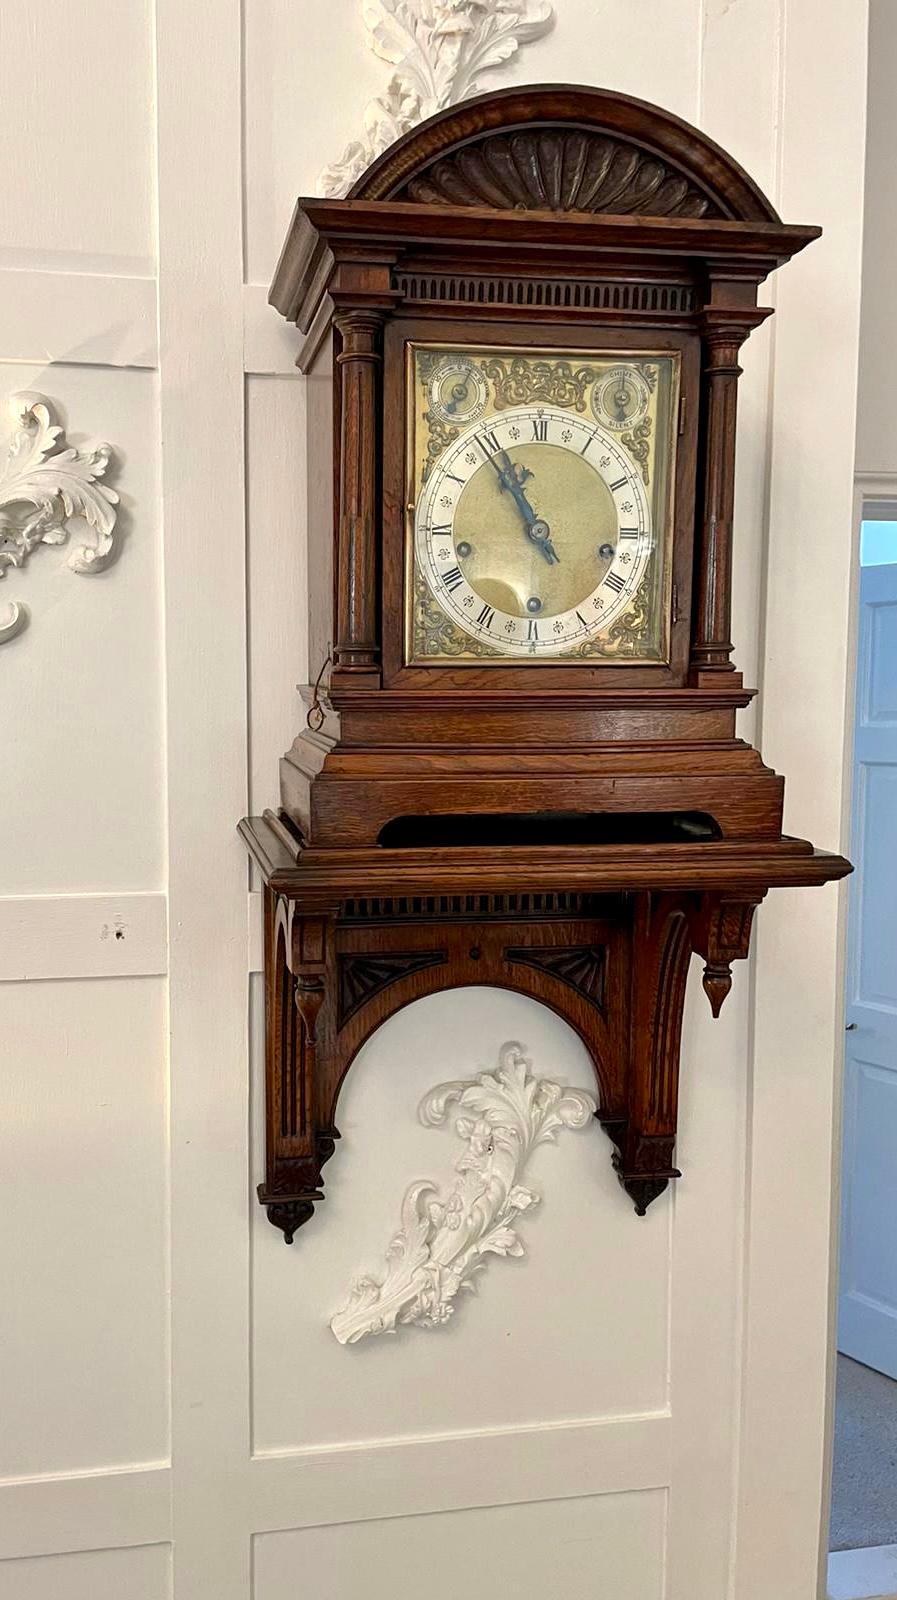 Antique Victorian quality oak 8 day chiming bracket clock with original bracket having a quality carved oak bracket clock with original carved oak bracket, ornate brass dial with original hands, silvered chapter ring with Roman numerals, 8 day